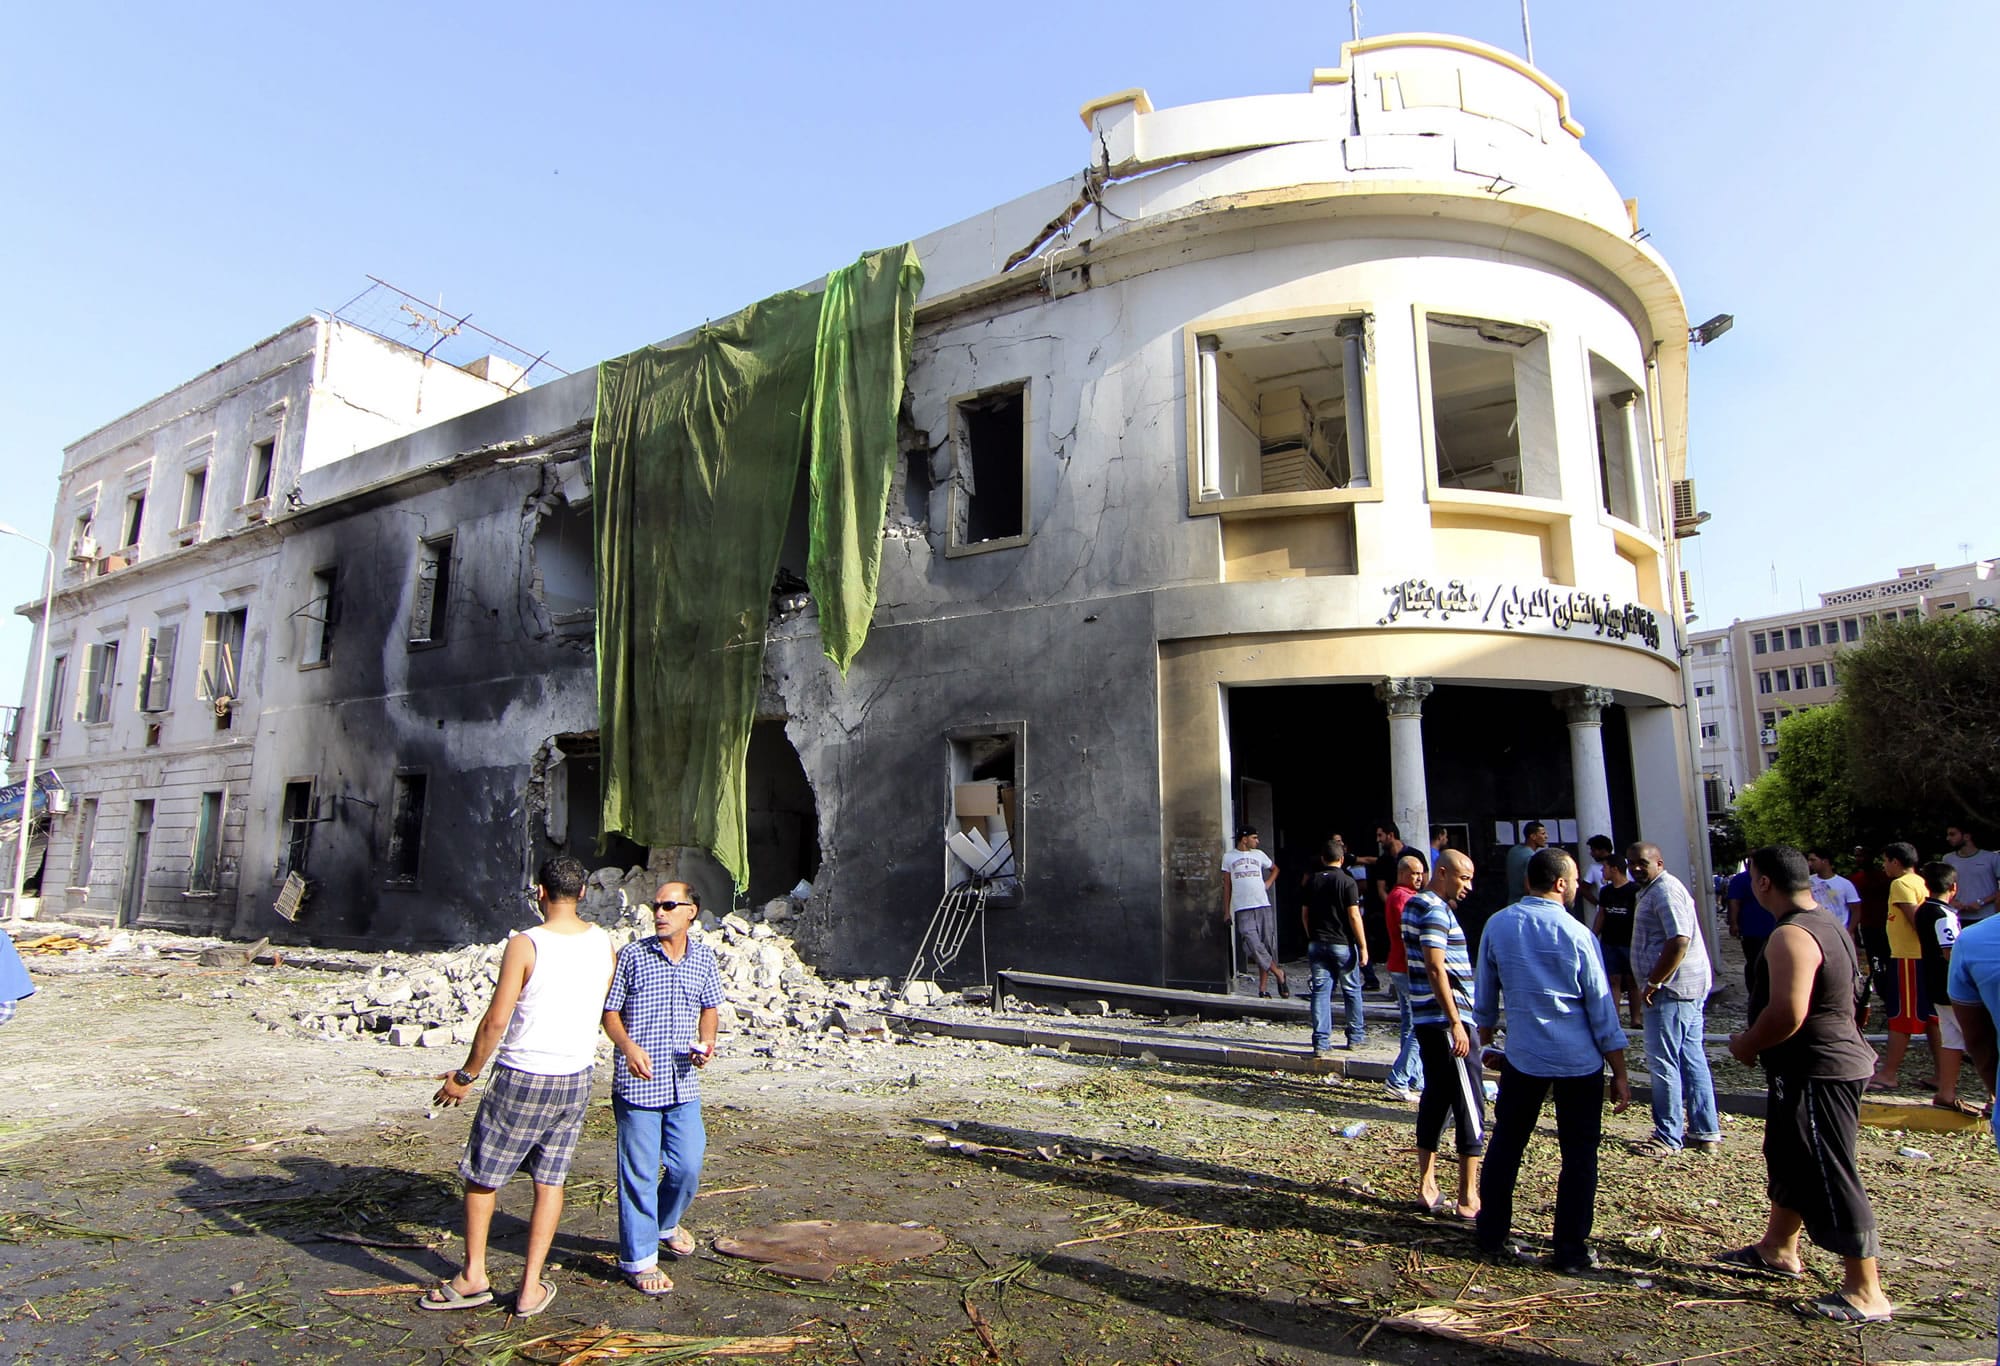 People gather to look at the site of a car bombing in Benghazi, Libya, on Wednesday.